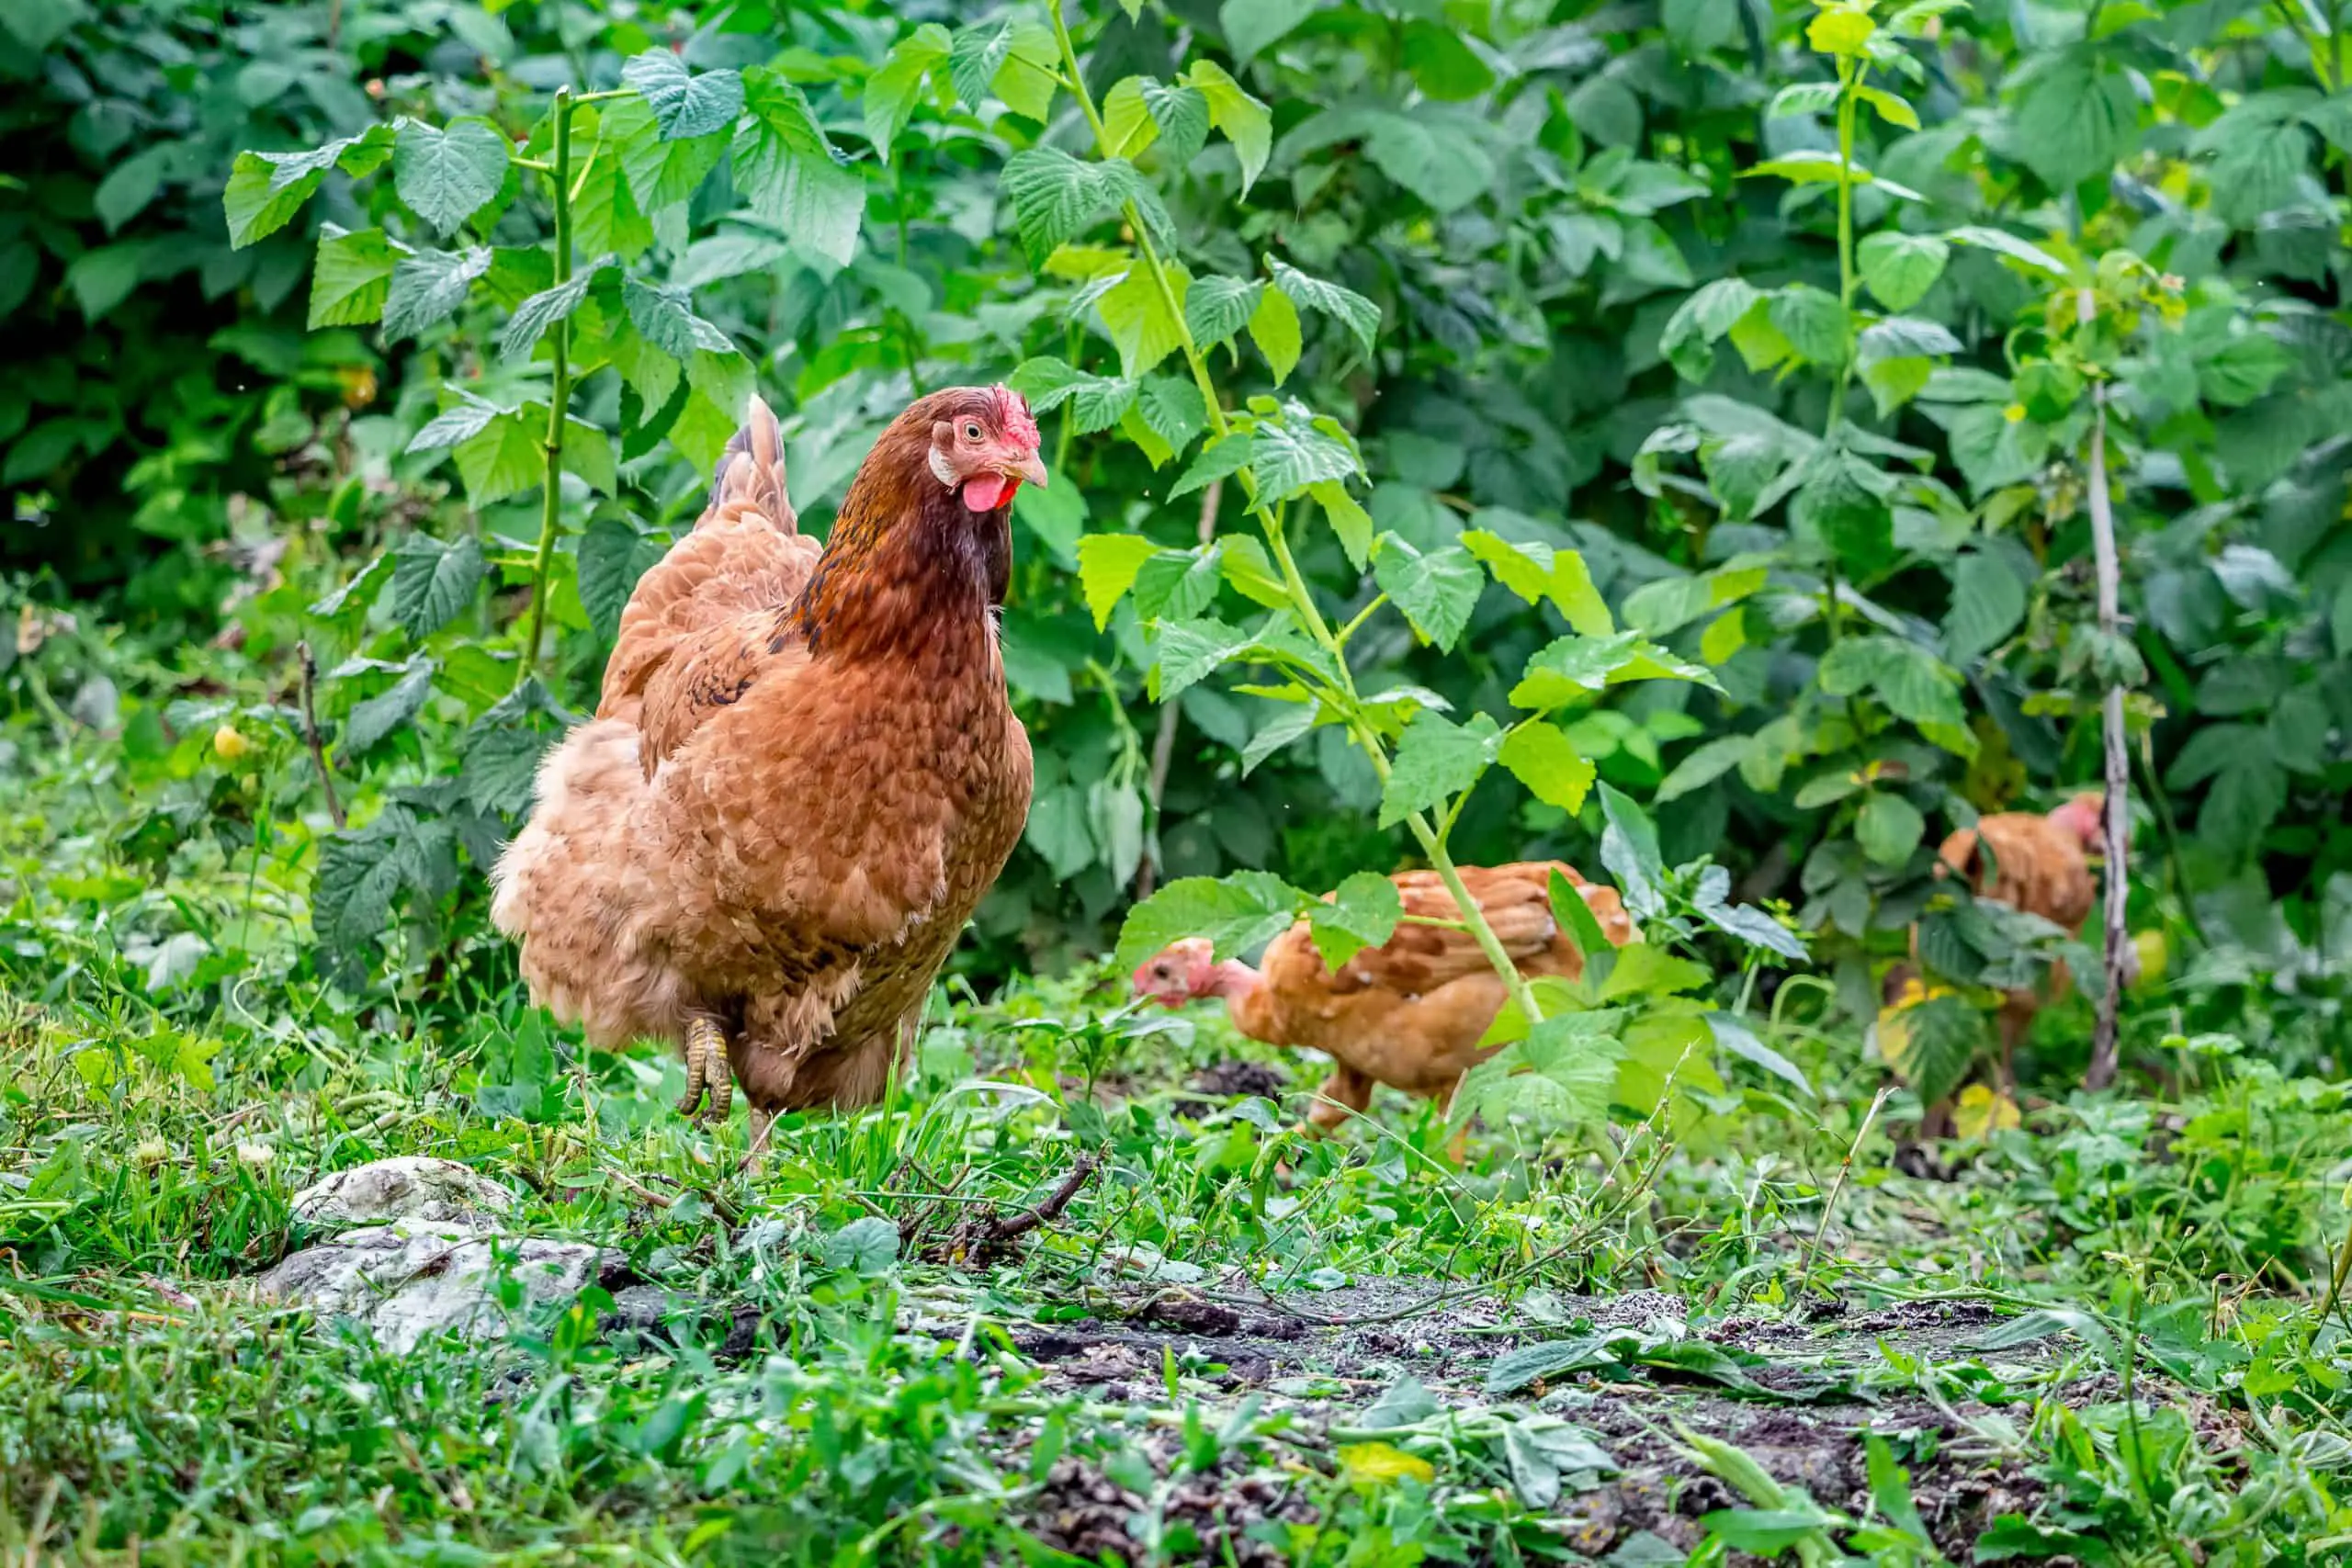 Chickens need to be careful when in the garden not to rub against weeds that have been sprayed with weed killer